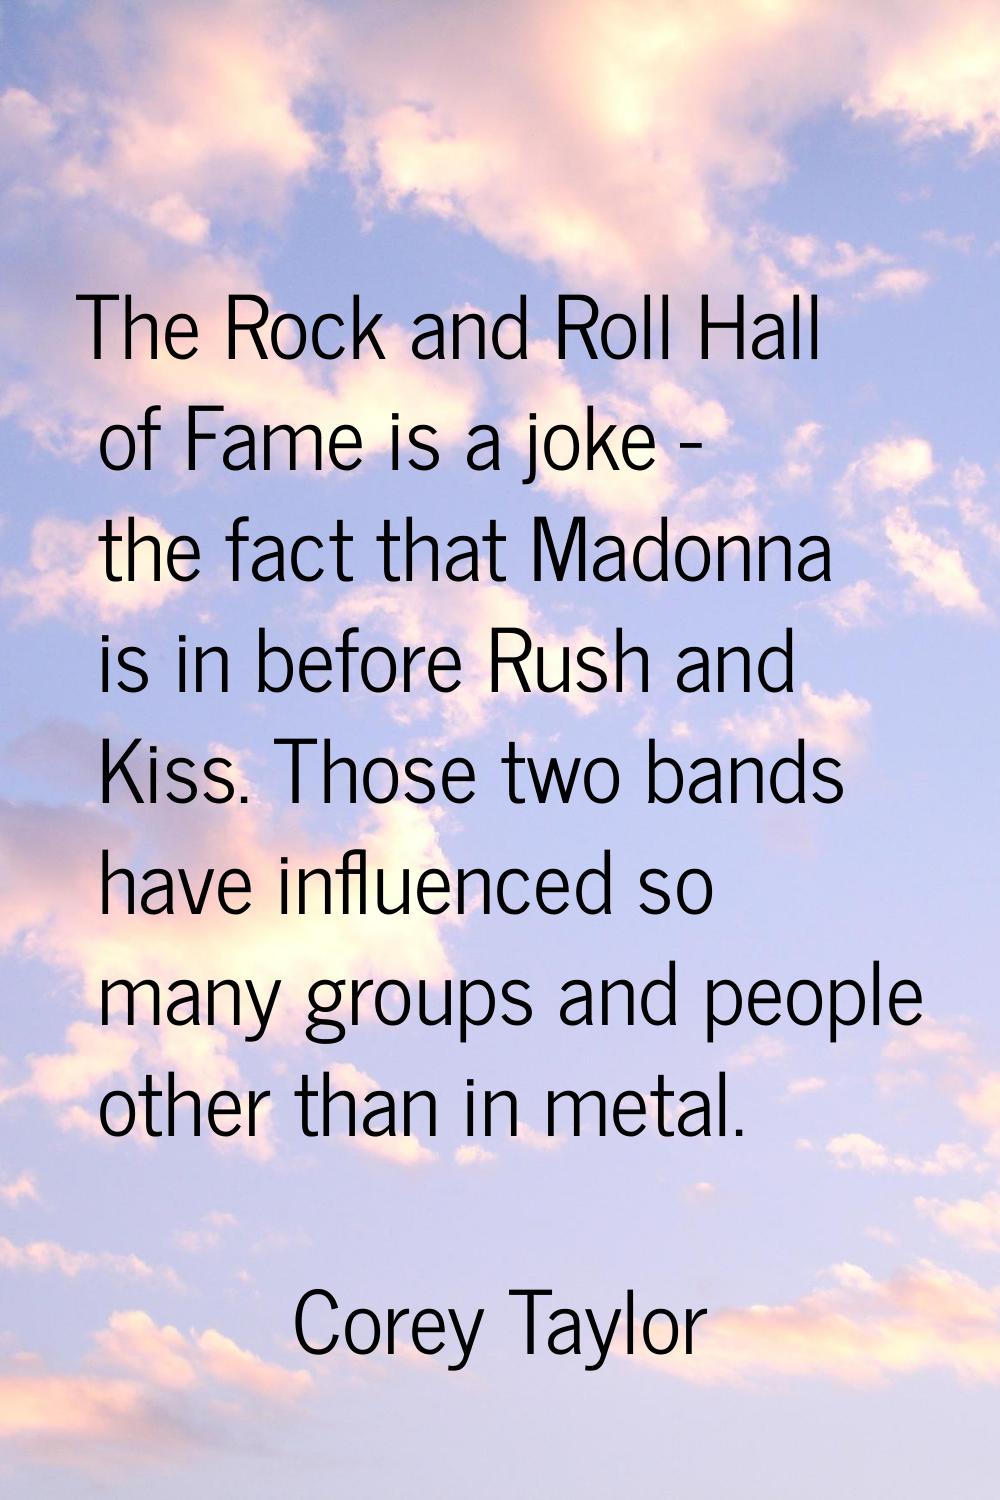 The Rock and Roll Hall of Fame is a joke - the fact that Madonna is in before Rush and Kiss. Those 